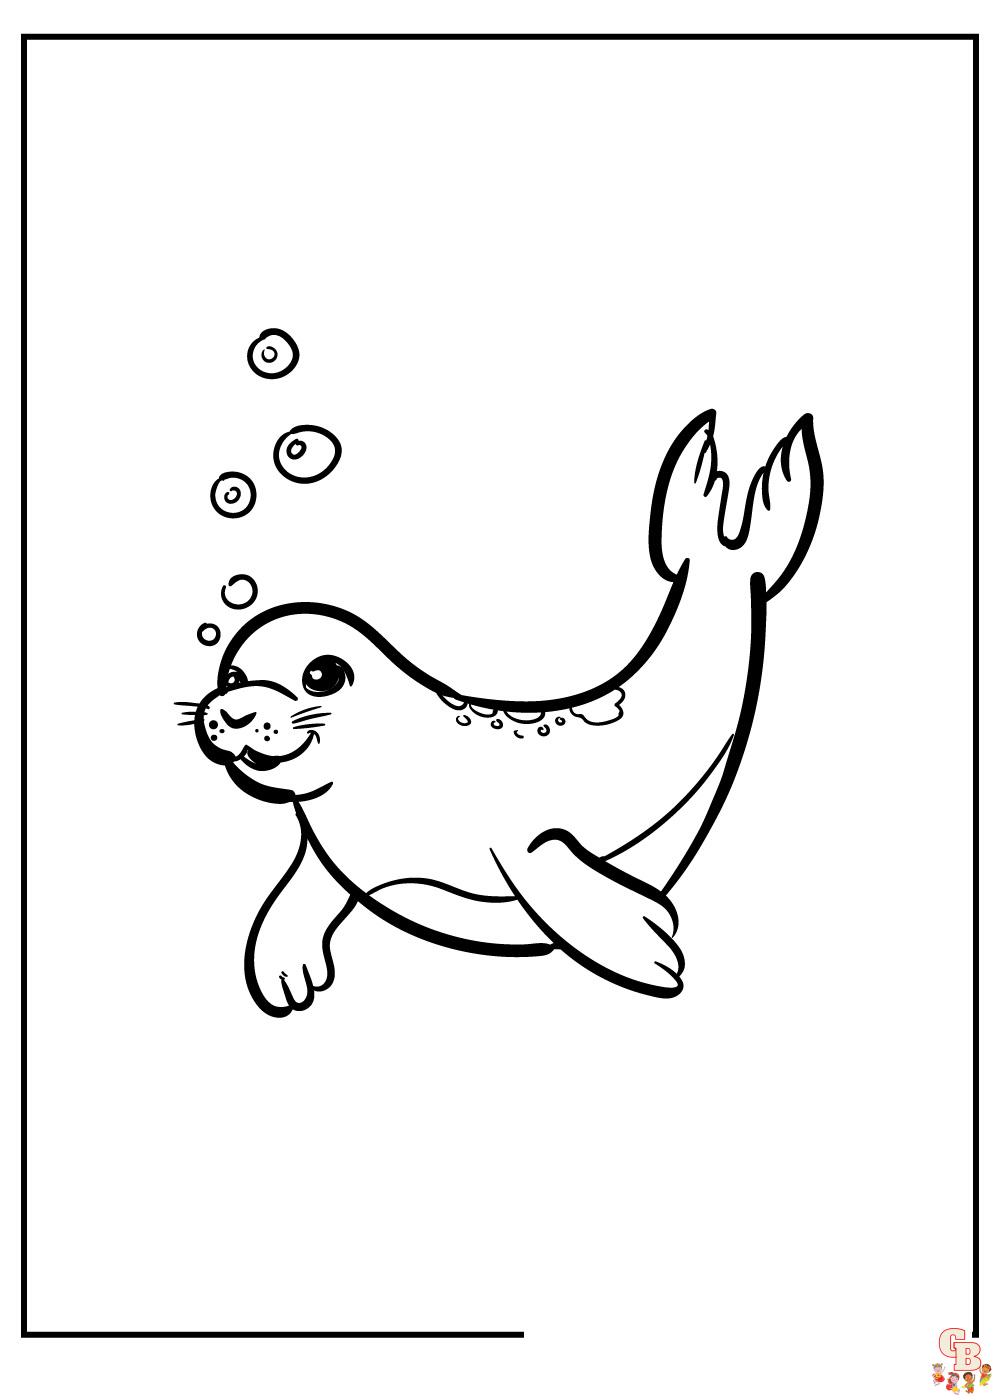 Seal Coloring Pages for kids